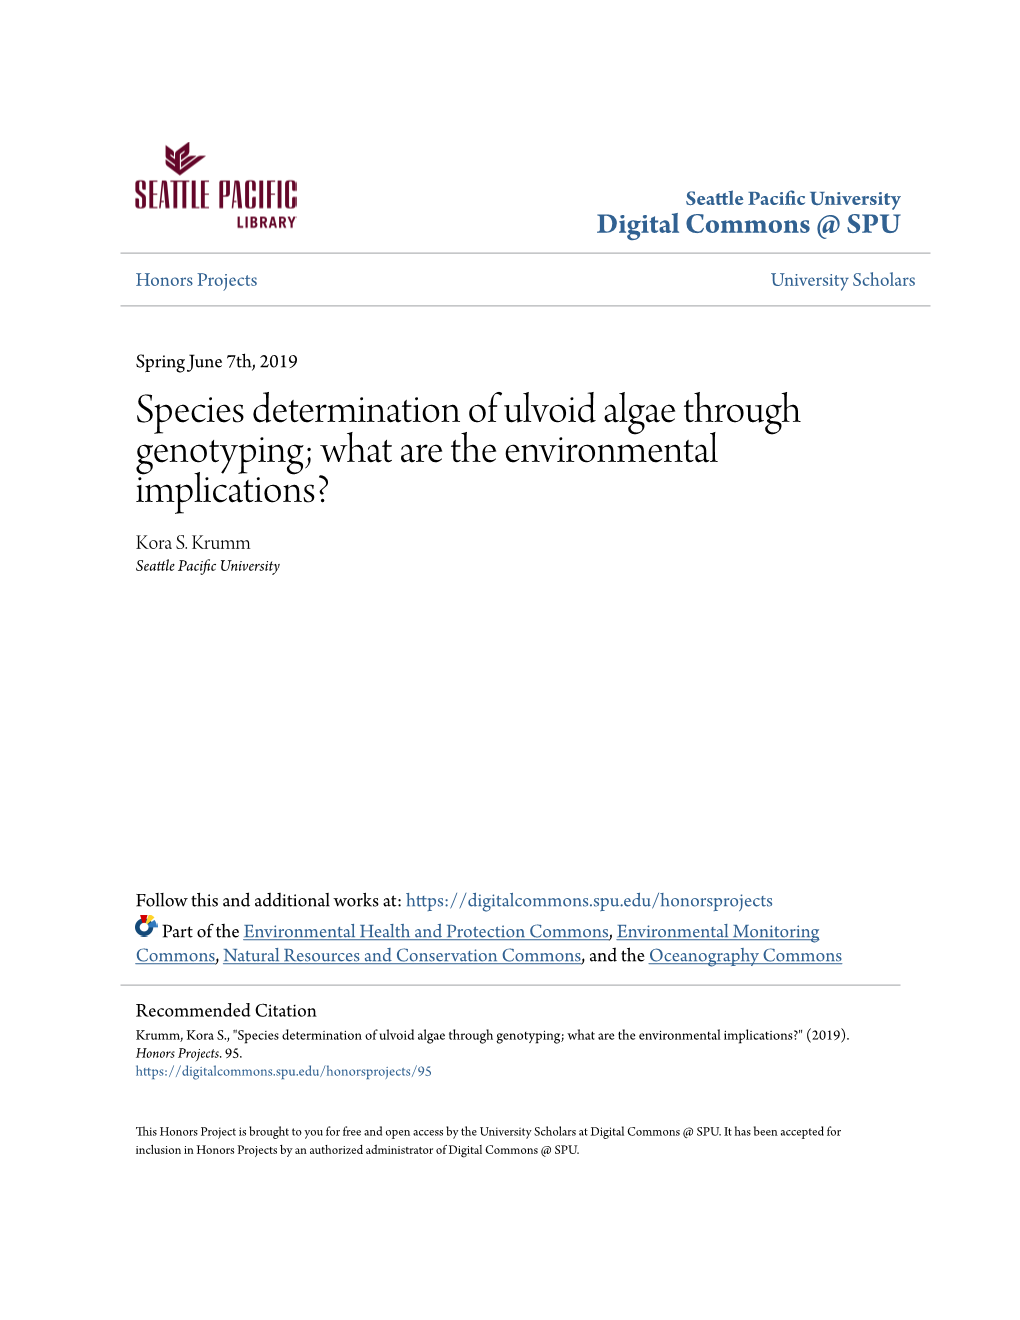 Species Determination of Ulvoid Algae Through Genotyping; What Are the Environmental Implications? Kora S